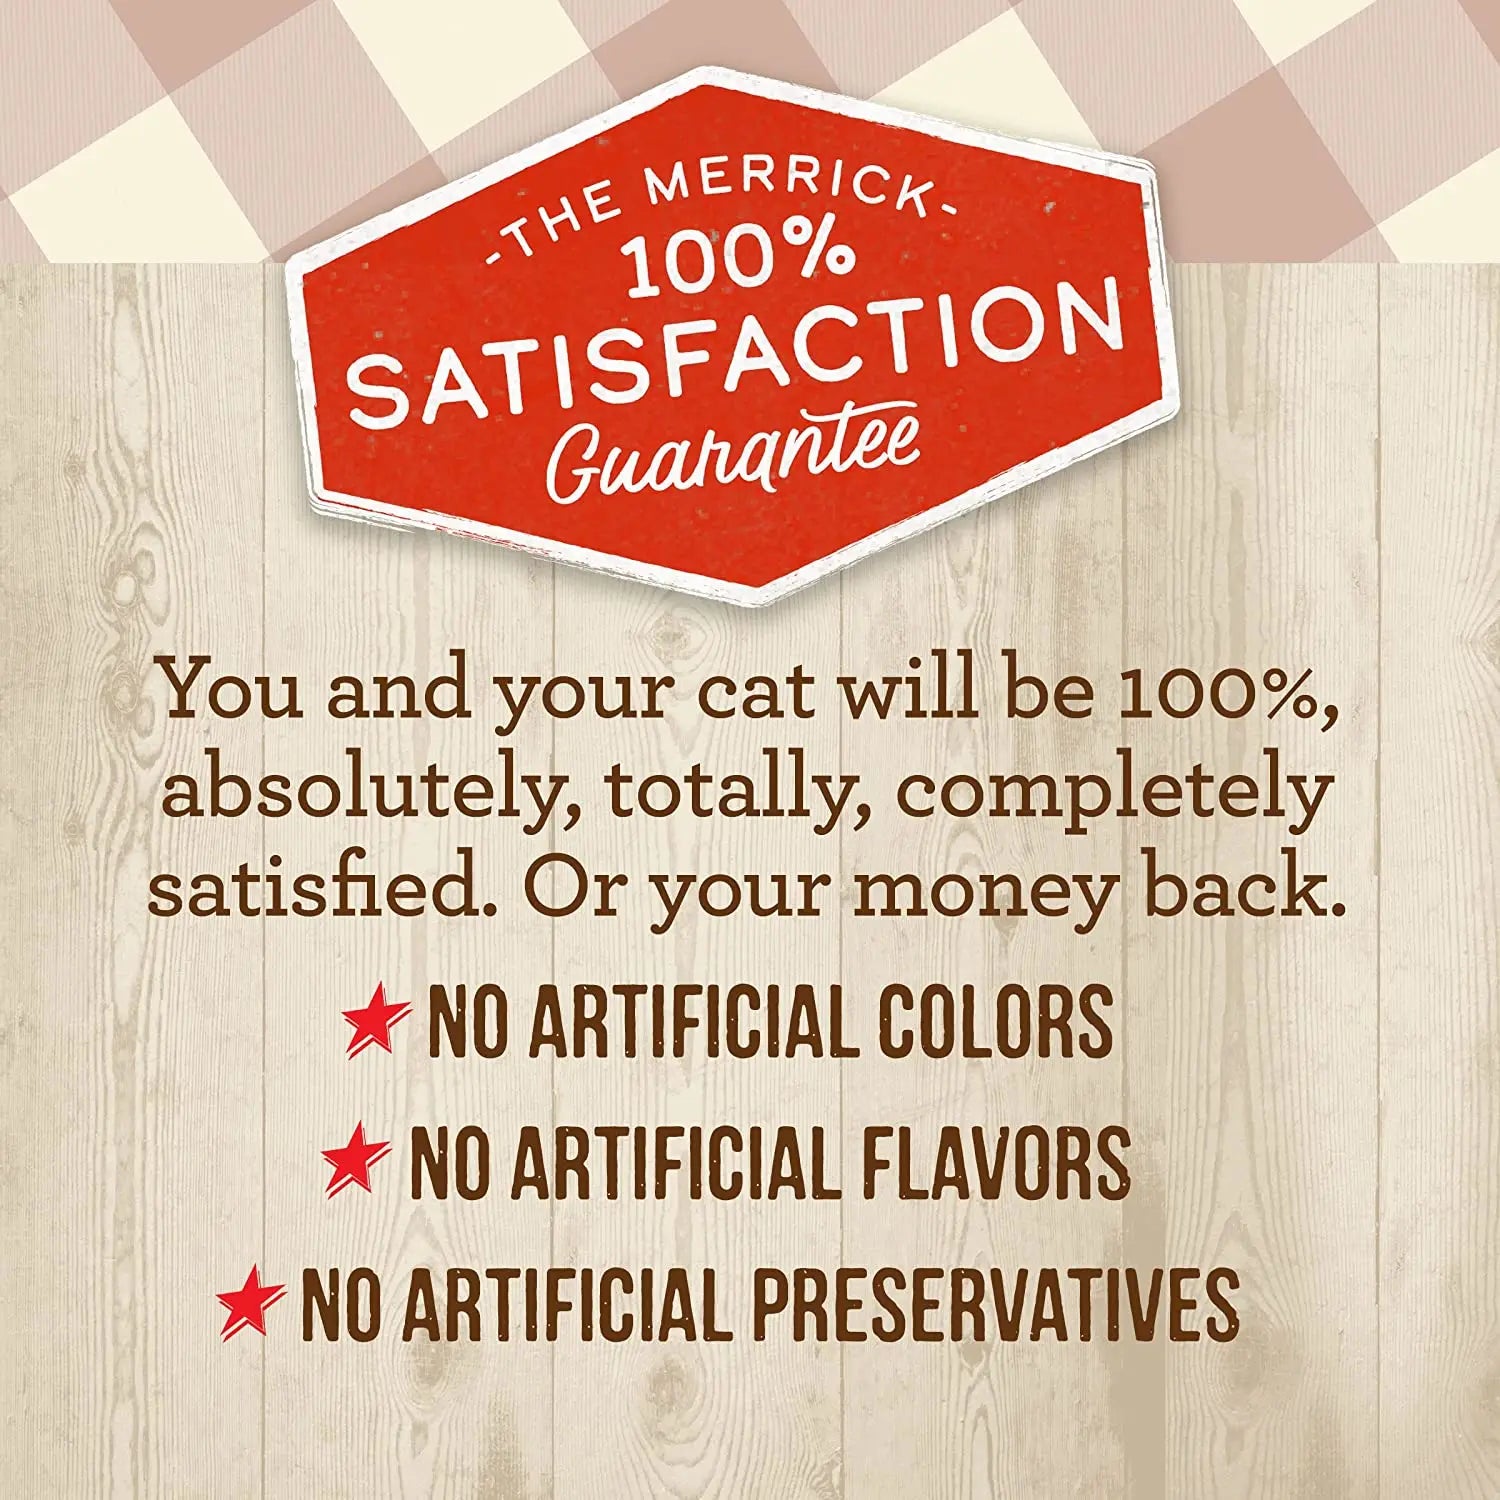 Merrick® Purrfect Bistro® Grain Free Chicken Pate All Life Stages Cat Food Merrick®